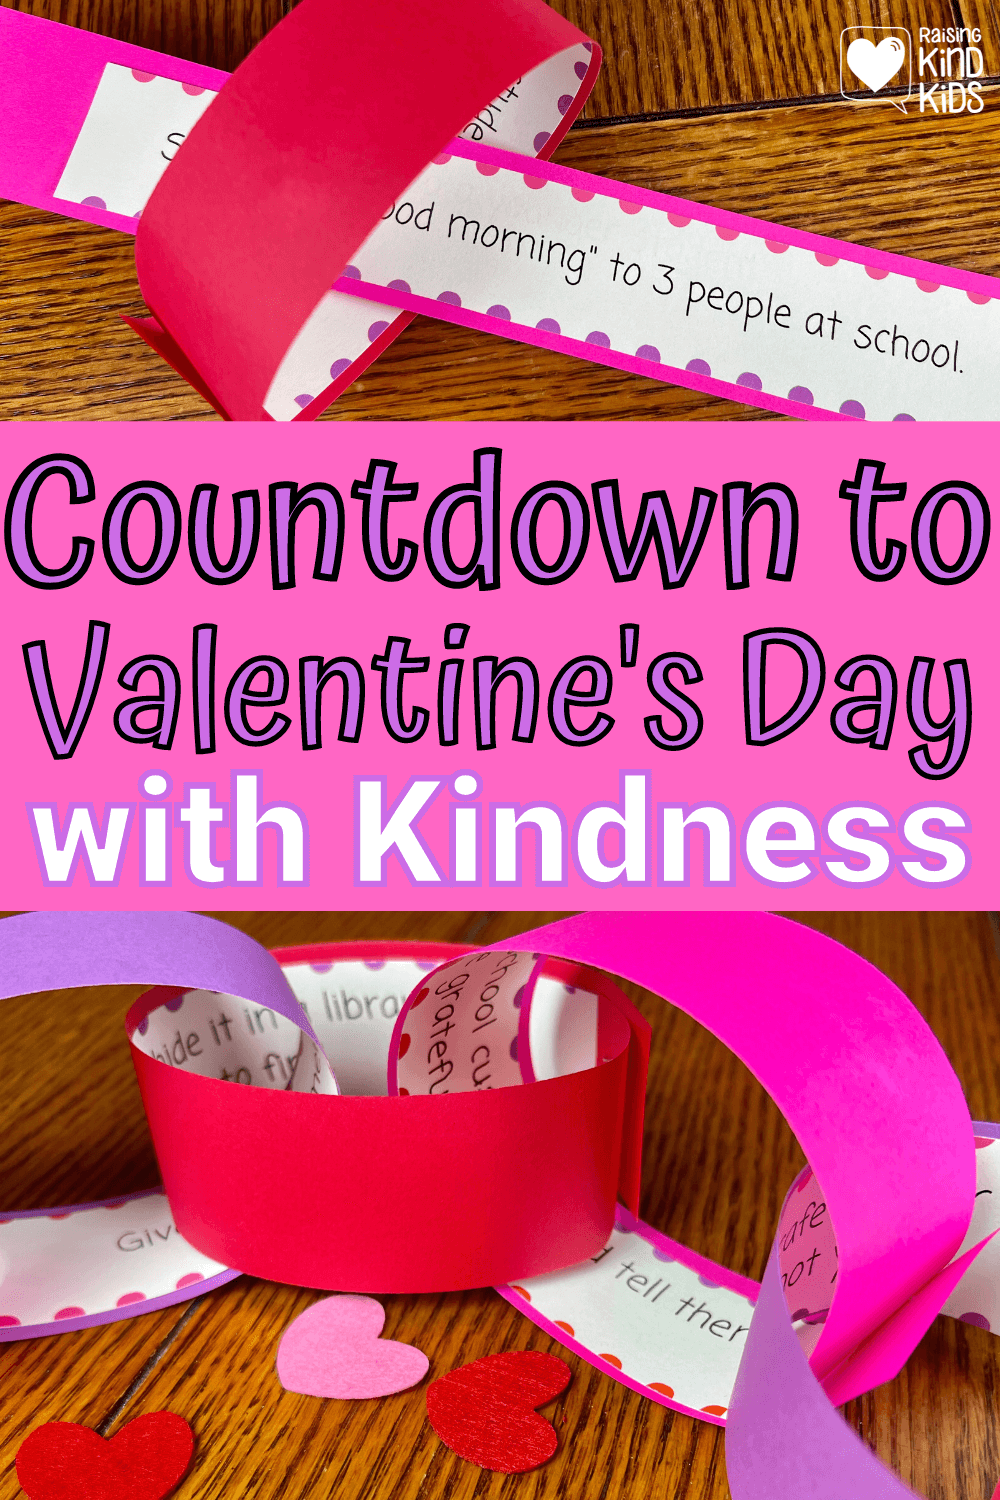 Use this countdown calendar to Valentine's Day as you spread kindness each day with these simple acts of kindness.